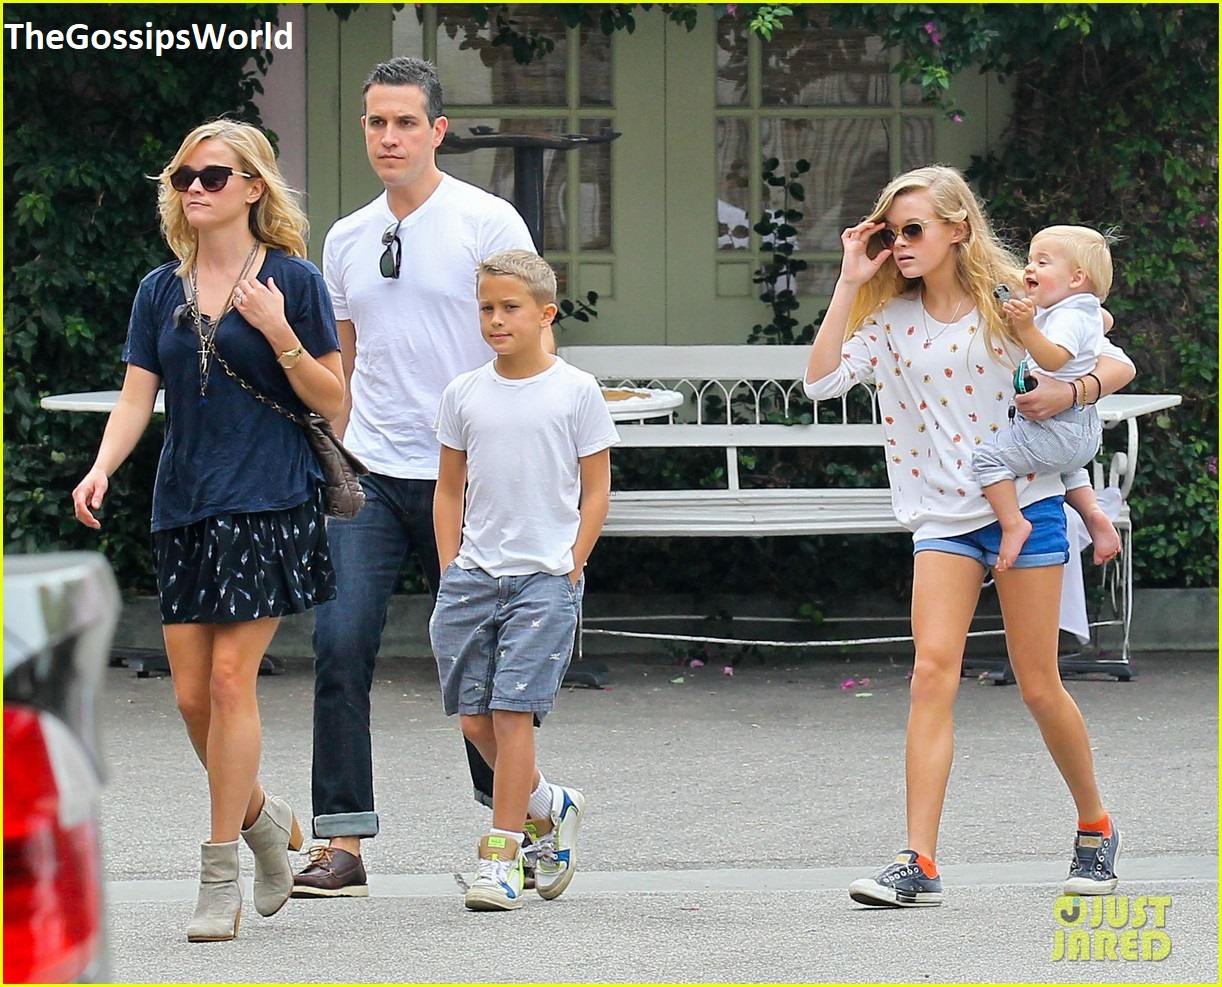 Does Reese Witherspoon Have Children With Jim Toth?